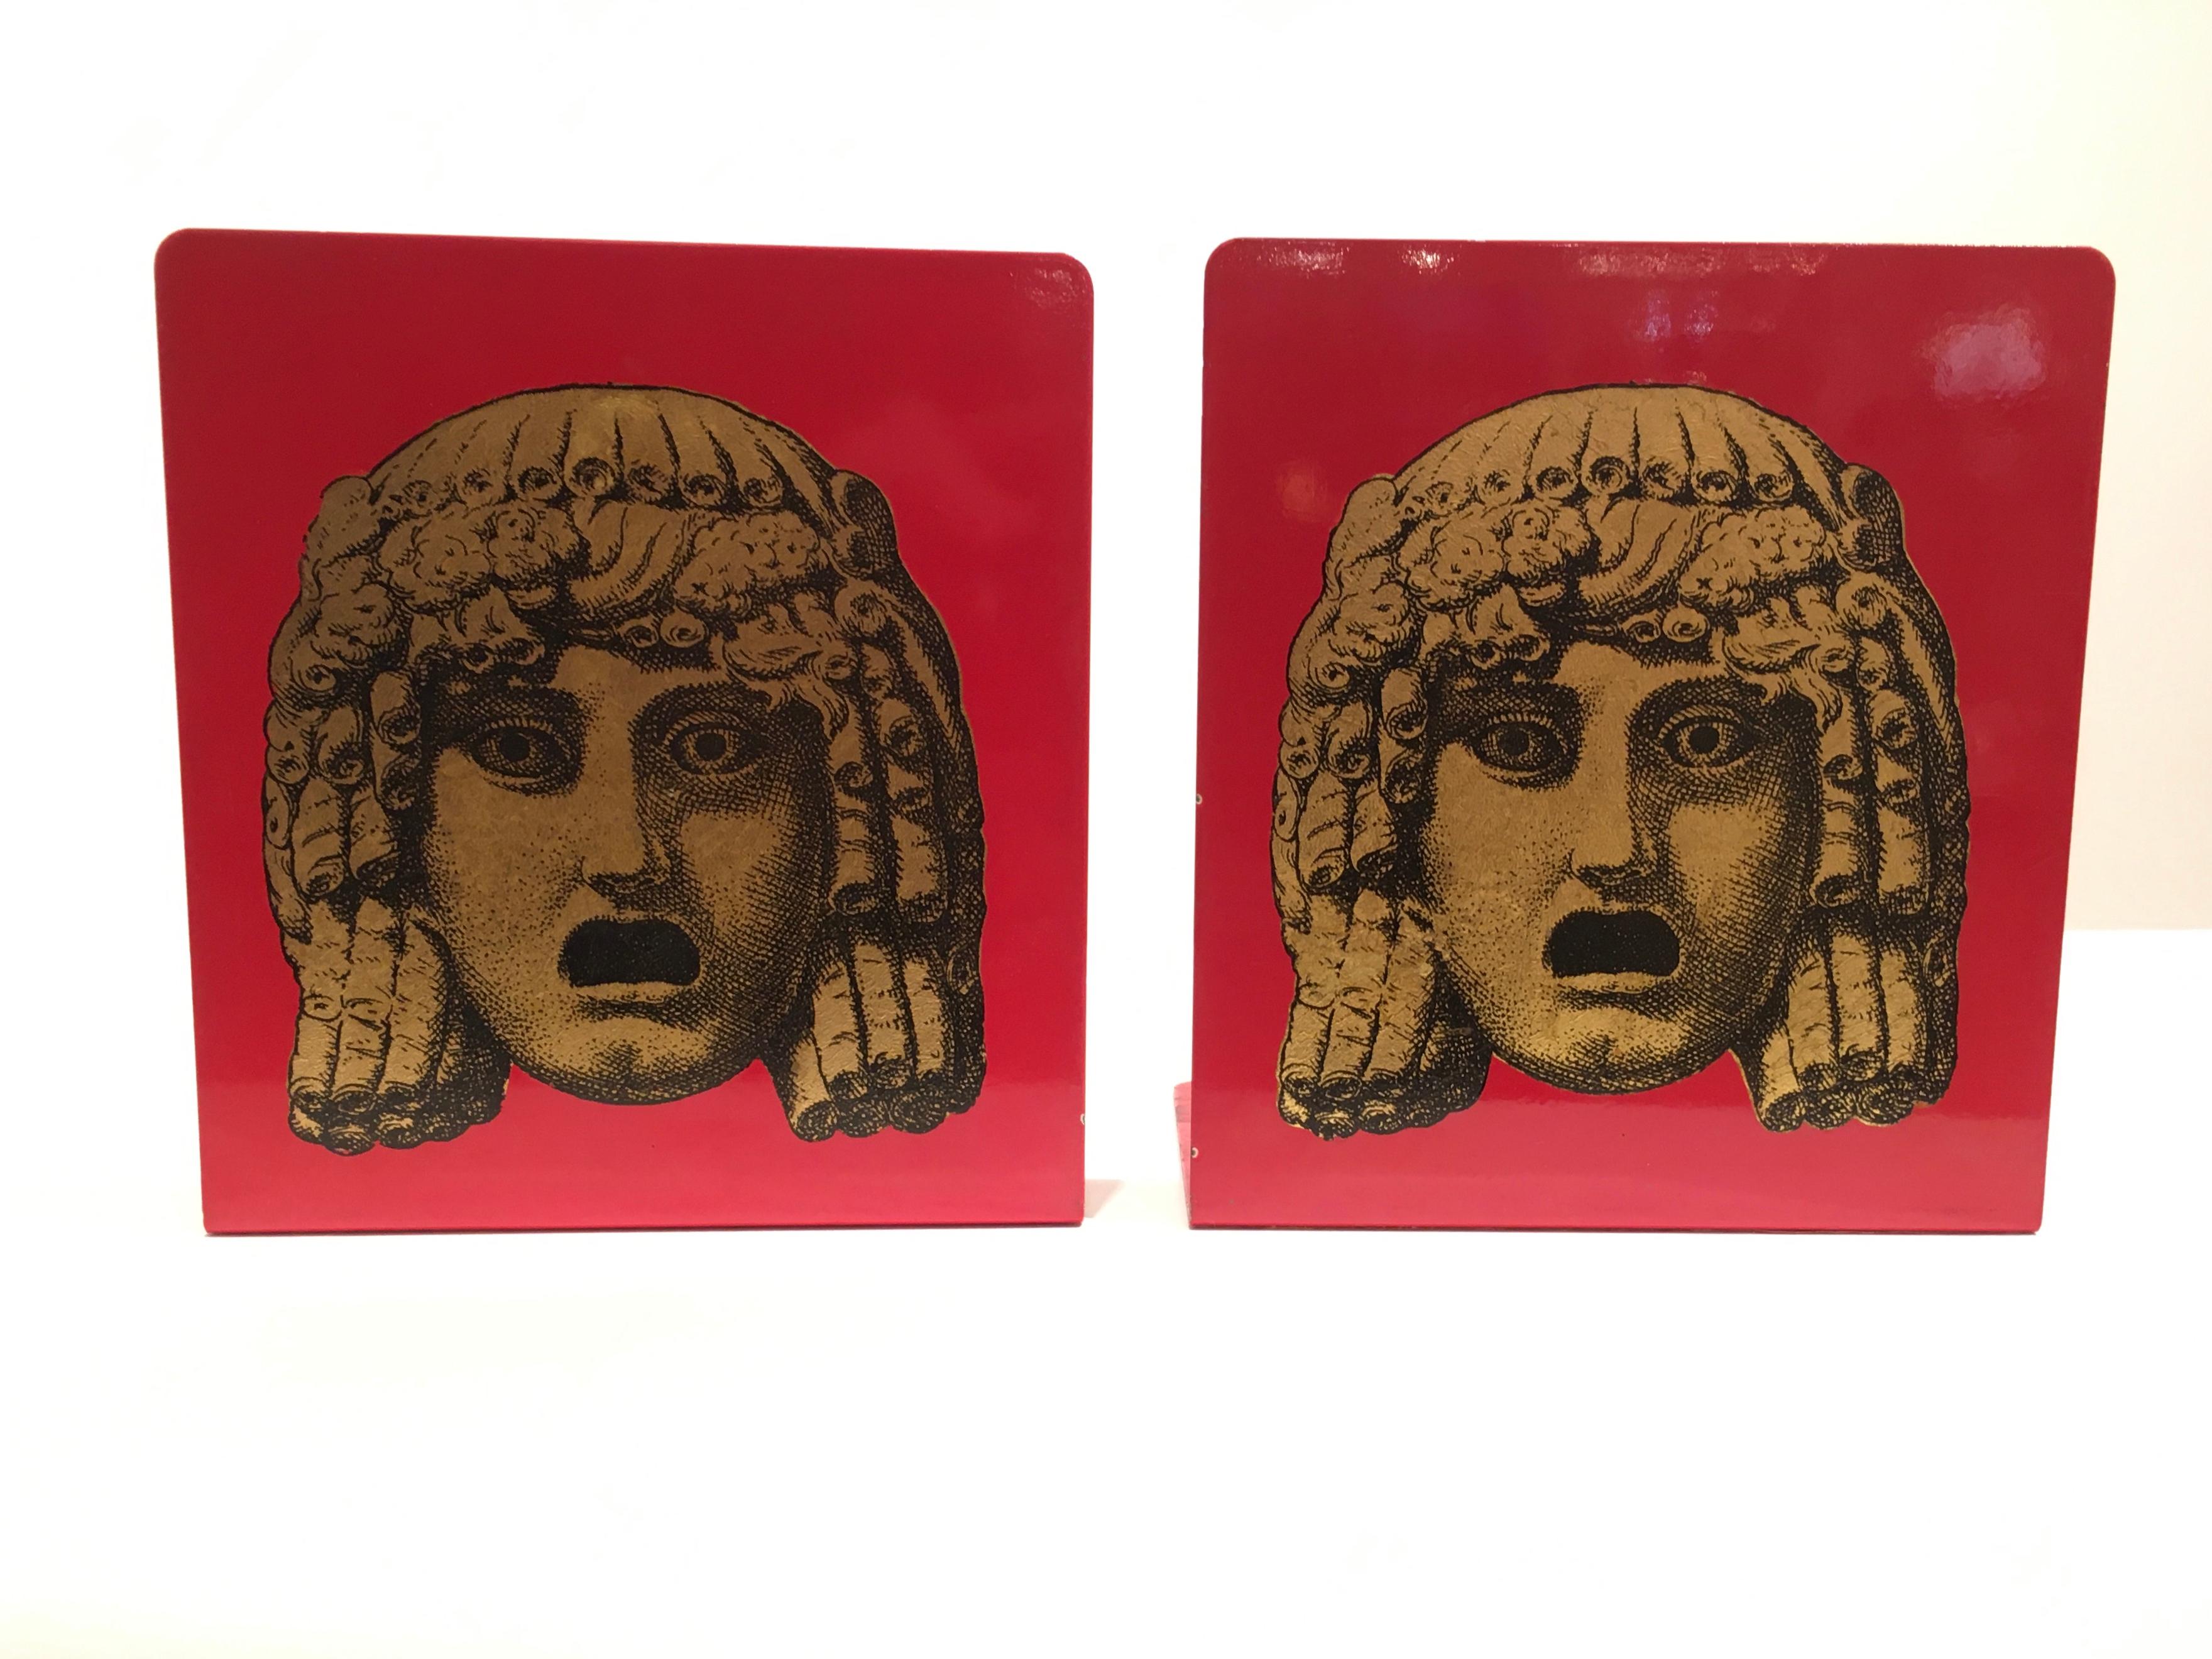 Felt Pair of 'Maschere' (Masks) Bookends by Piero Fornasetti, Italy, circa 1950 For Sale